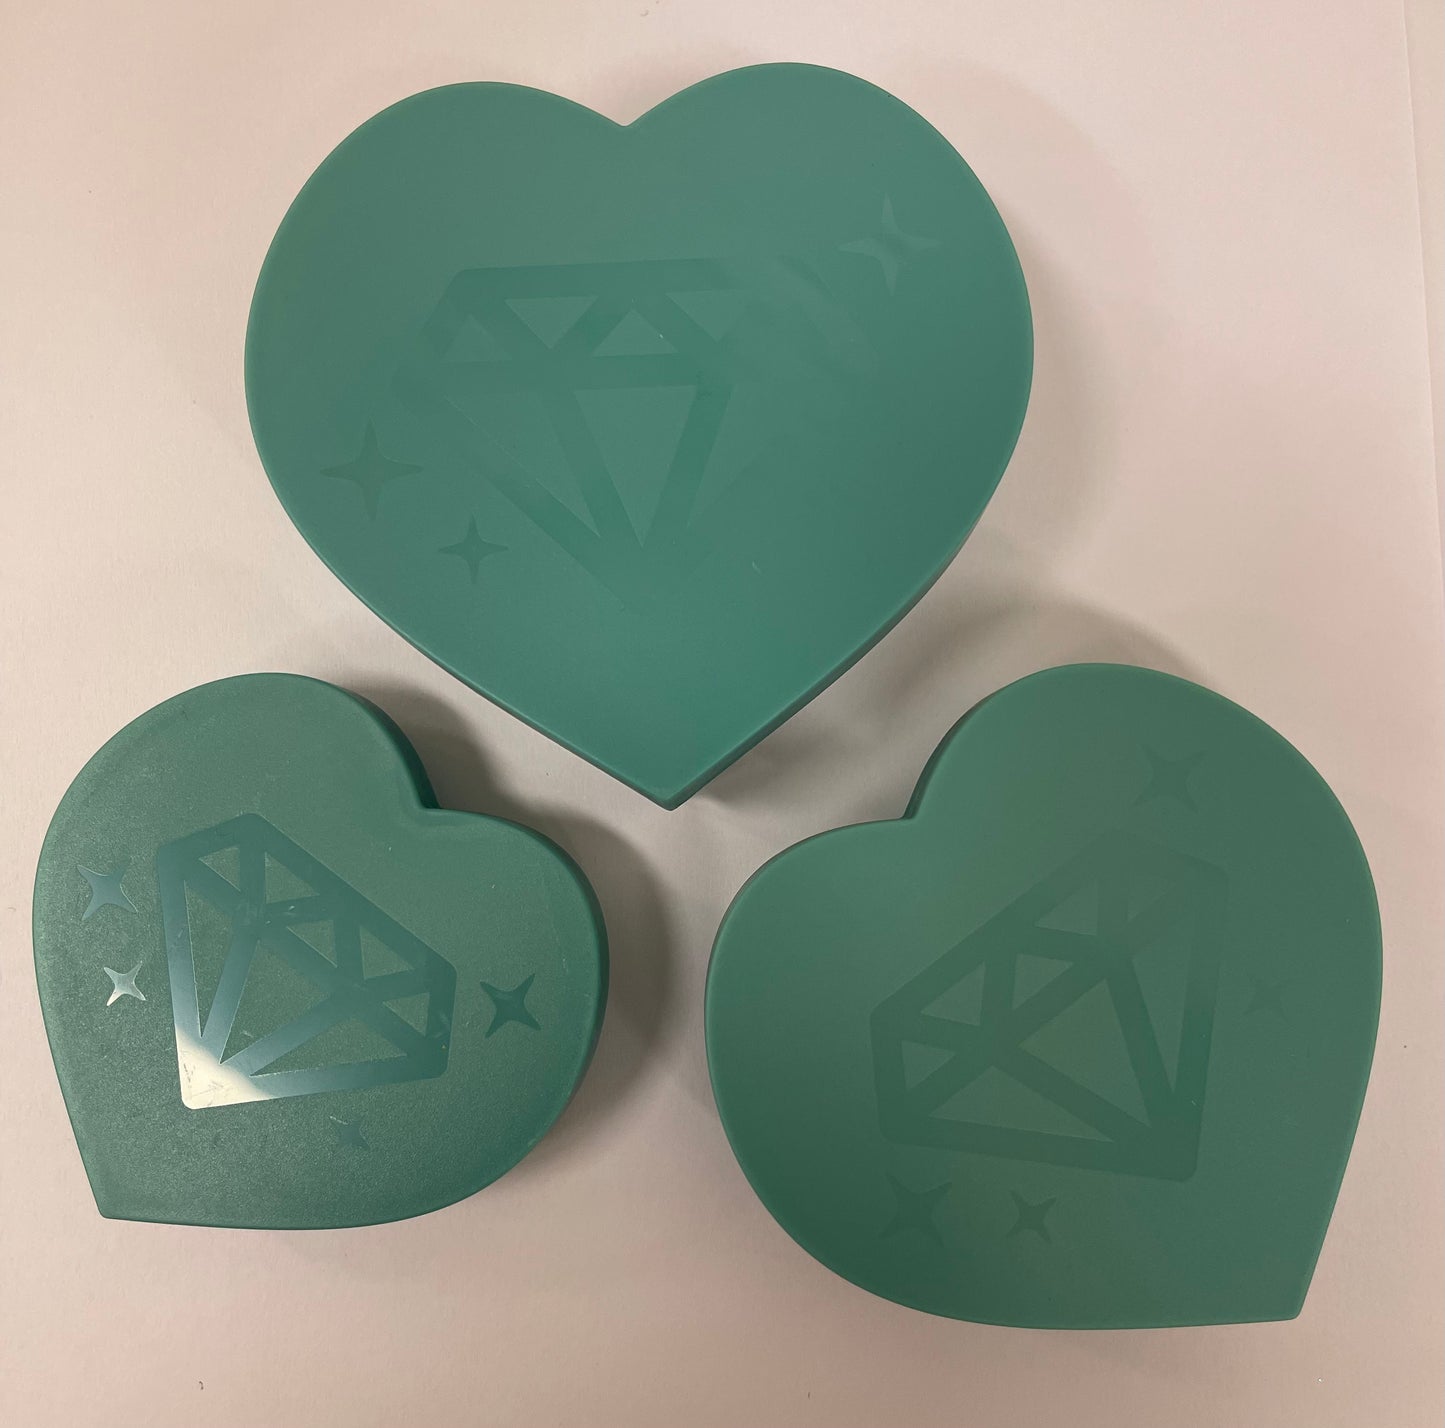 Limited Edition Heart Crystal Trays - Teal